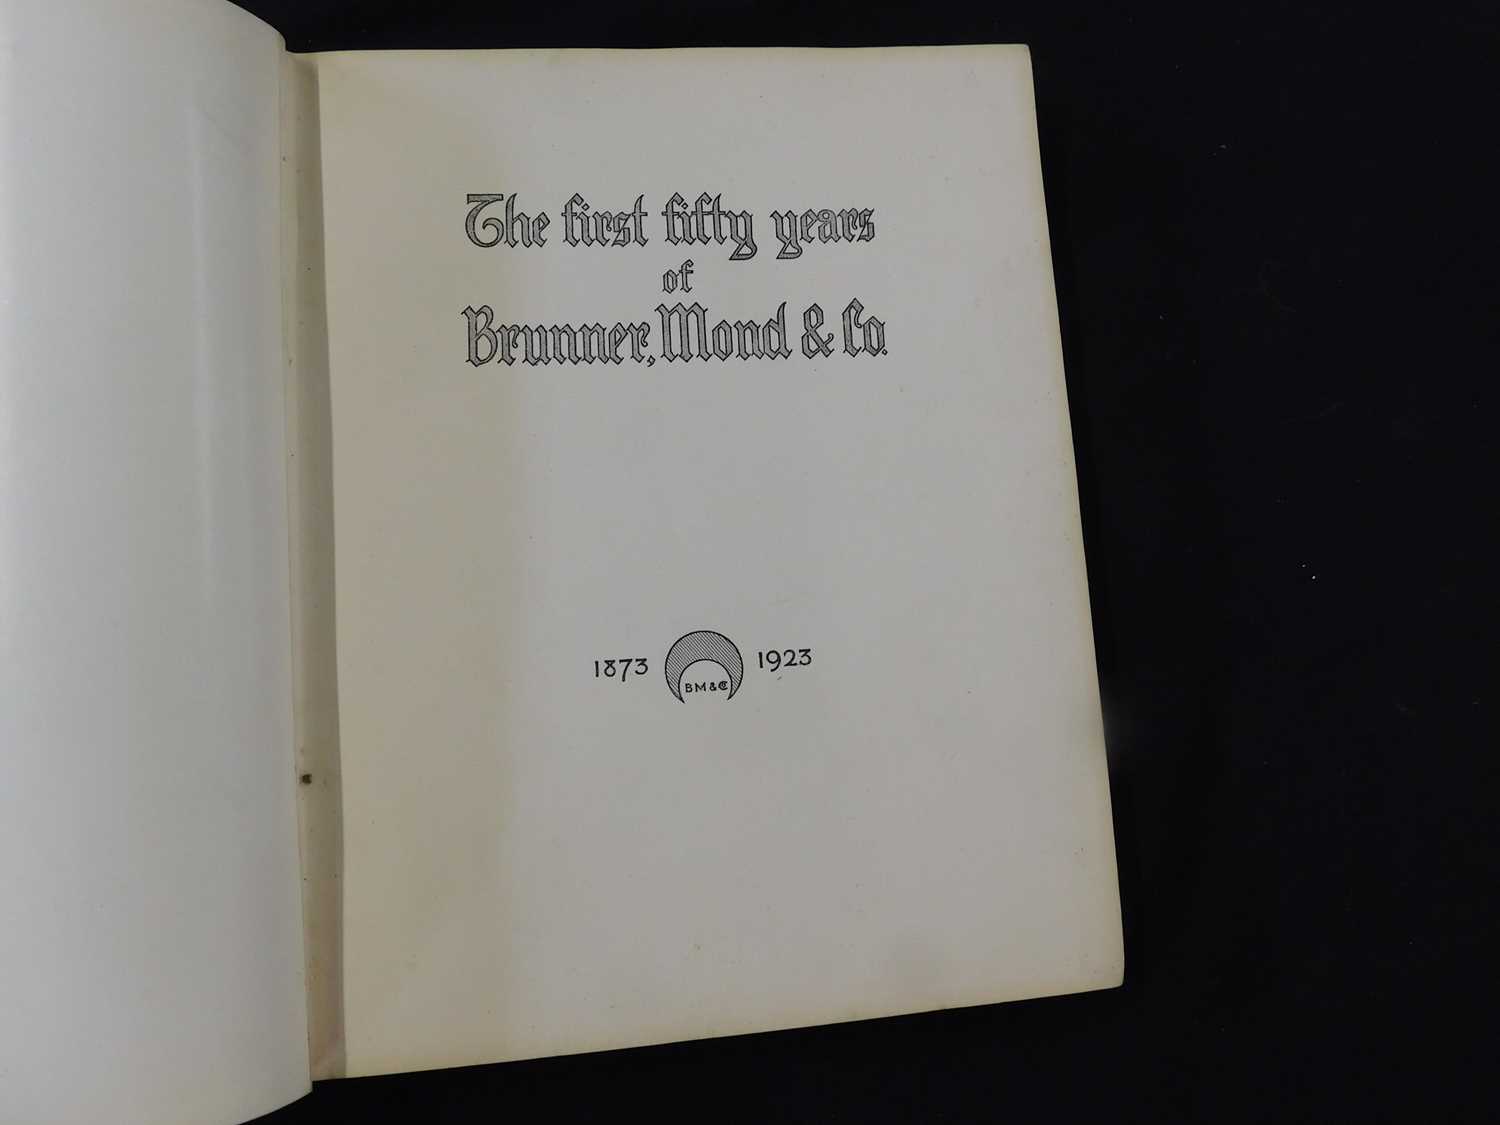 The Fifteth Anniversary - the firsts Fifty Years of Brunner Mond & Co 1873-1923" - Image 2 of 2